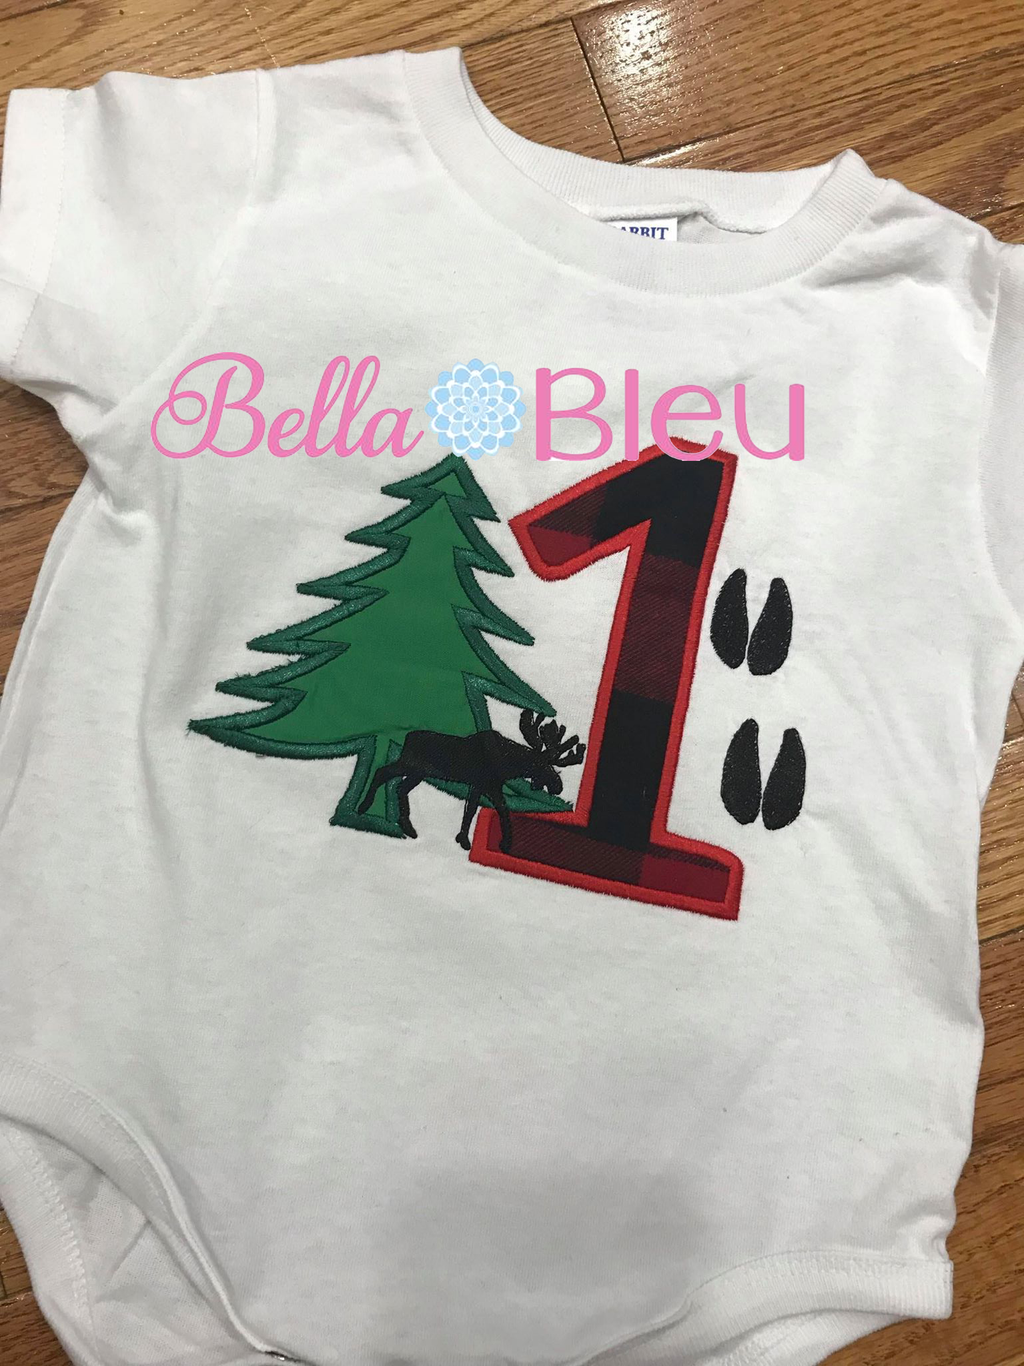 Baby's 1st First Birthday Lumberjack theme with pine tree , moose and deer tracks